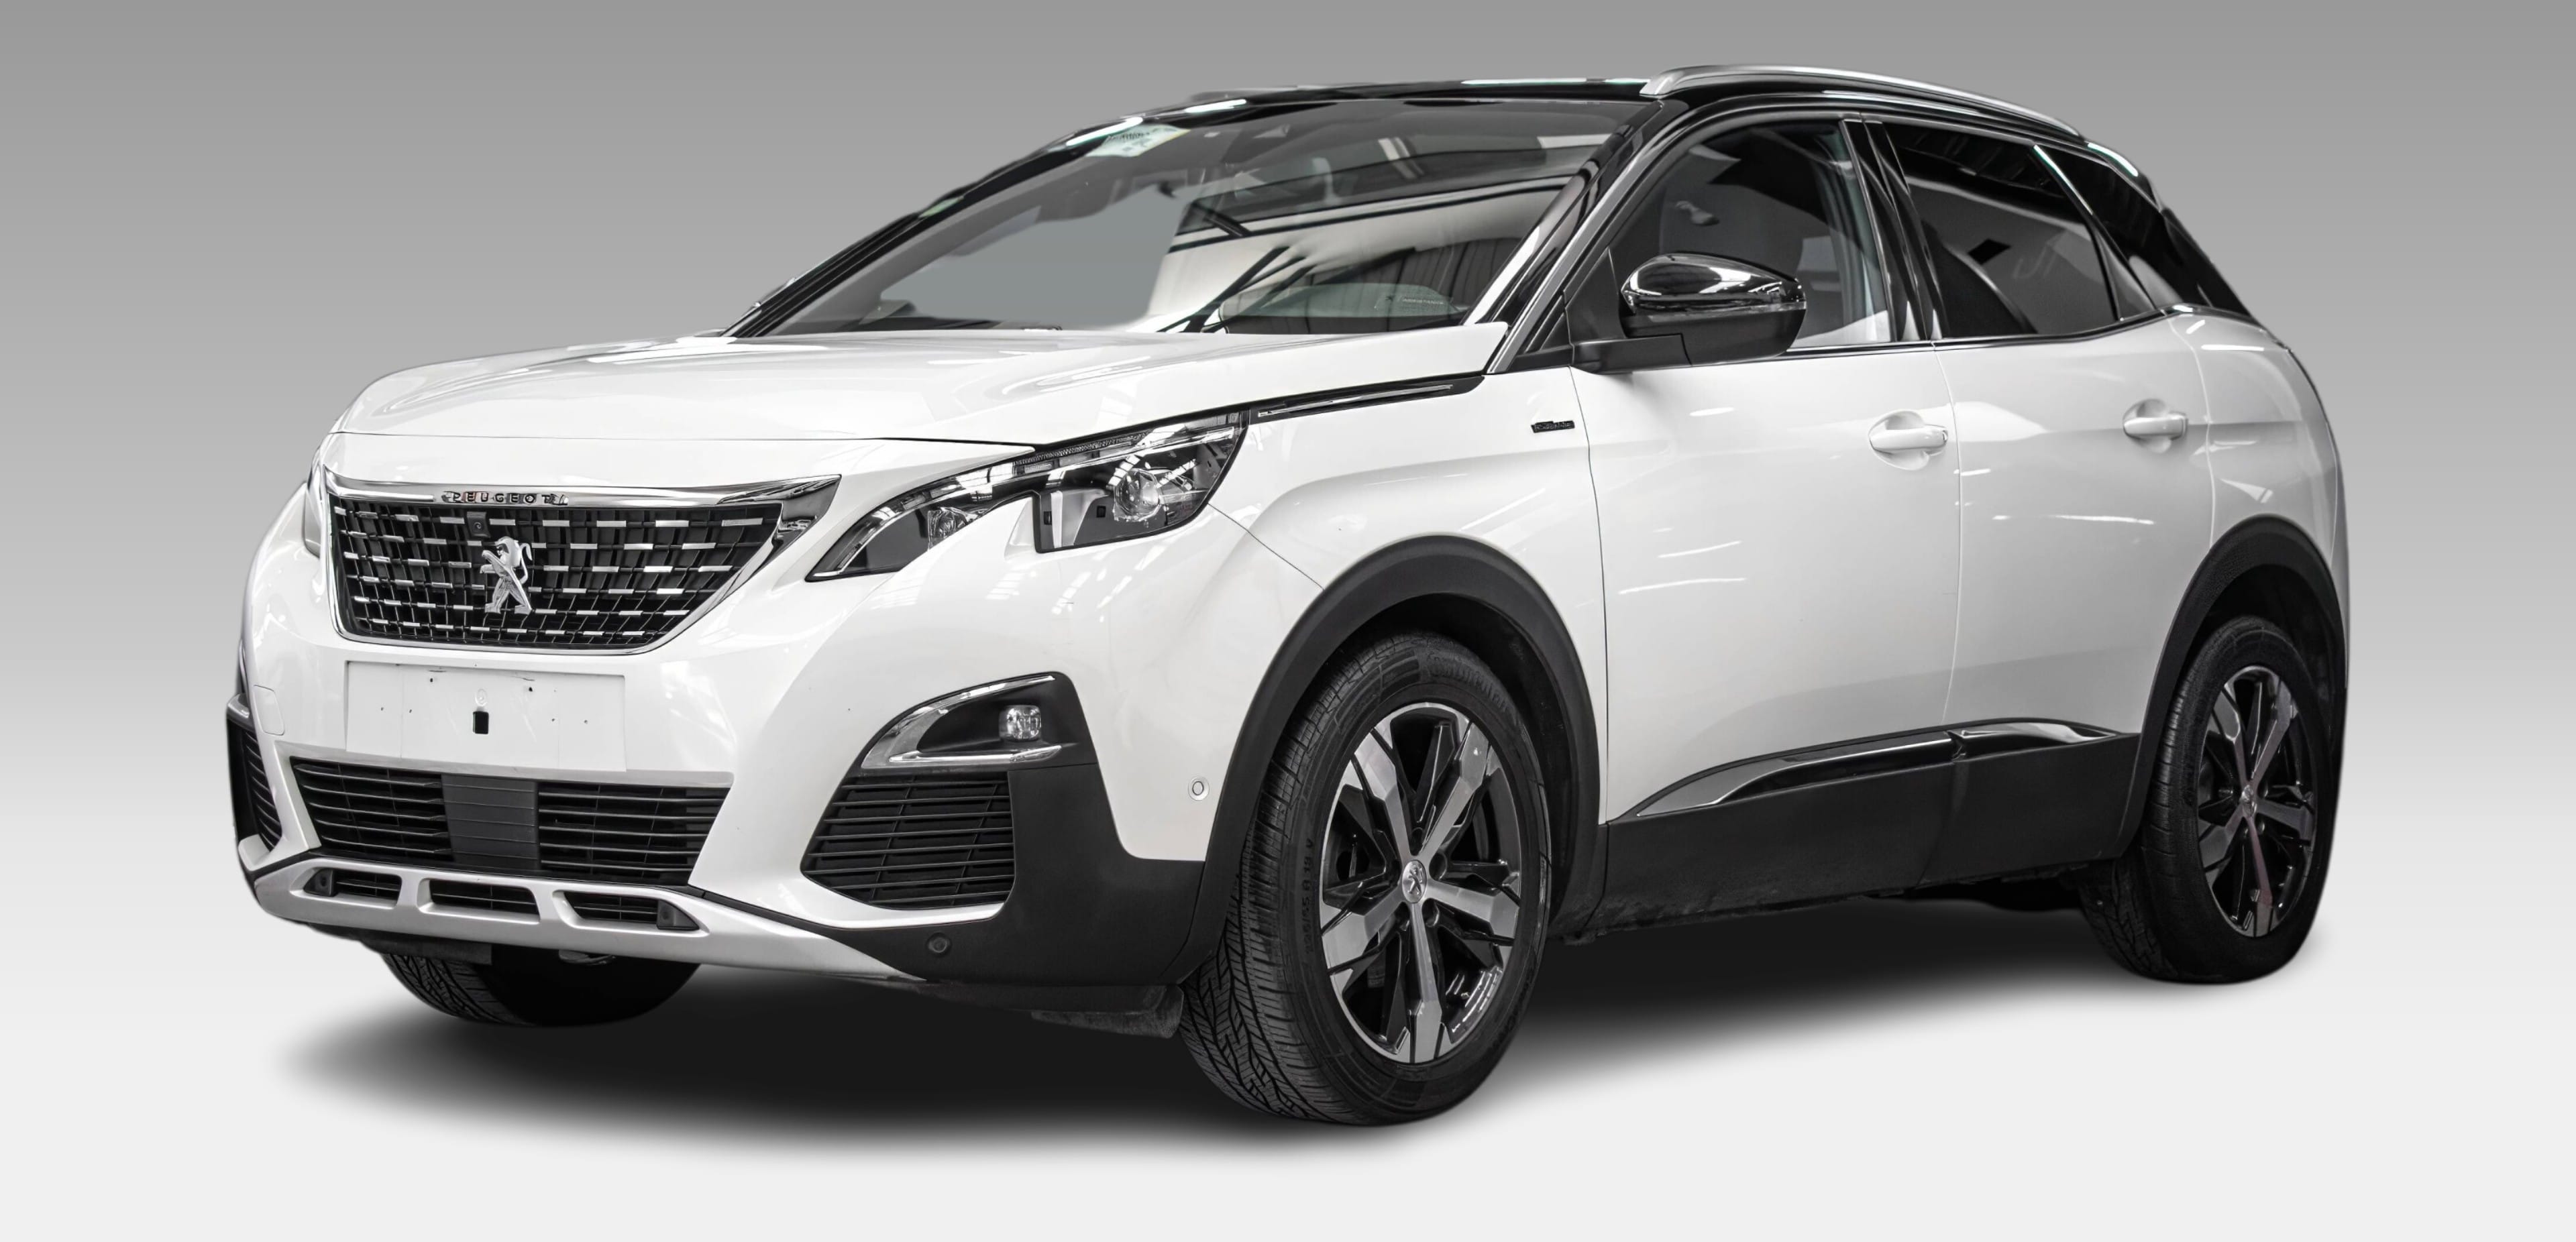 Peugeot 3008 SUV 1.6 Gt Line Thp At 2019 - AutoPrice